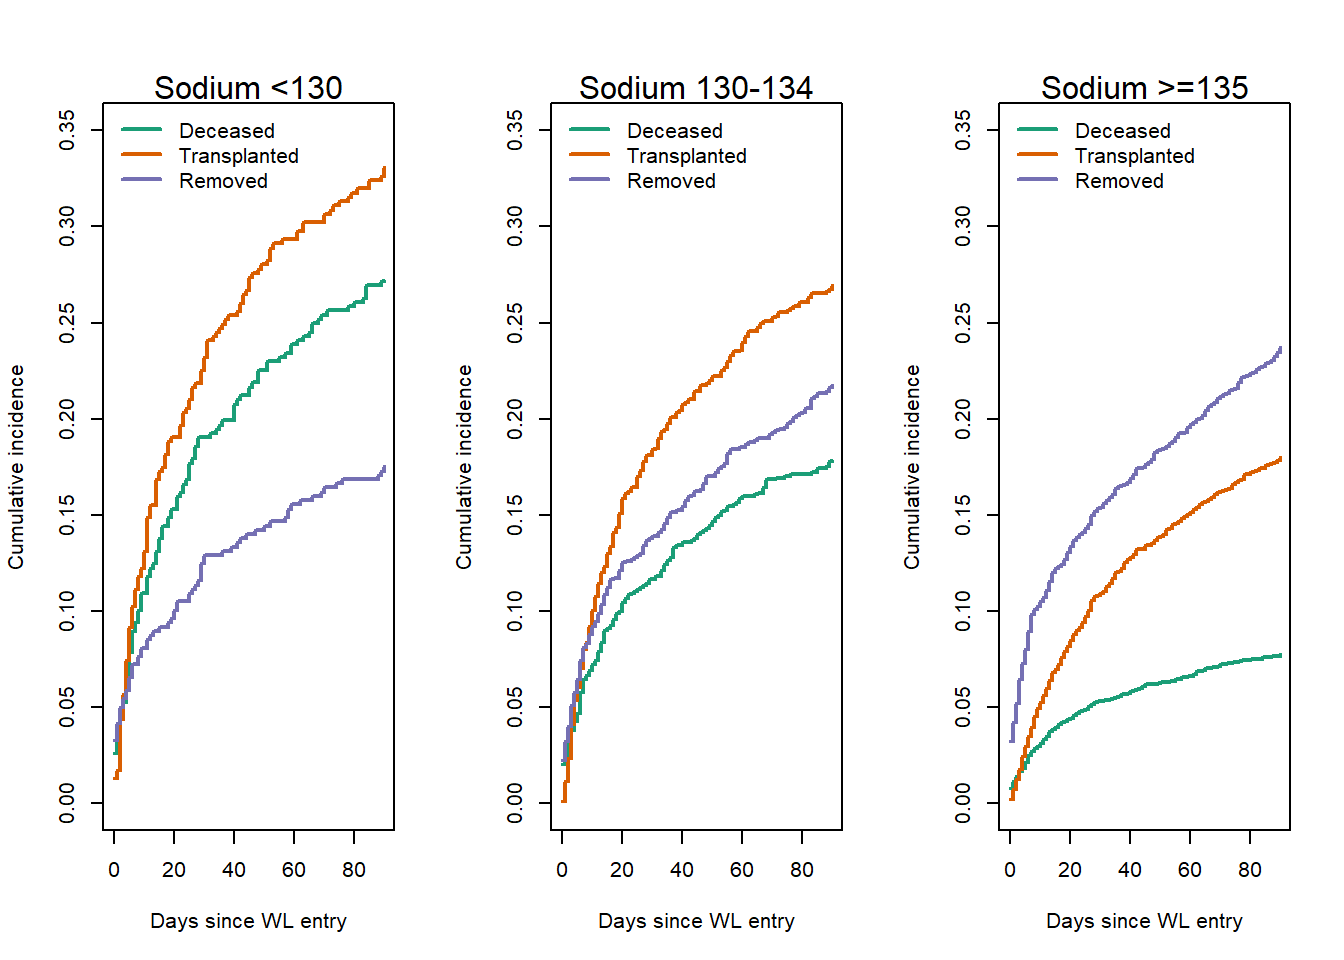 Cumulative incidence plots for 90-day WL outcomes, with competing risks of death, transplantation and removal due to clinical condition or censoring for NSE or HU status during waiting. Hyponatriemic patients show increased rates of mortality (27%) and transplantation (33%) compared to normonatriemic patients (respectively 8% and 18%).